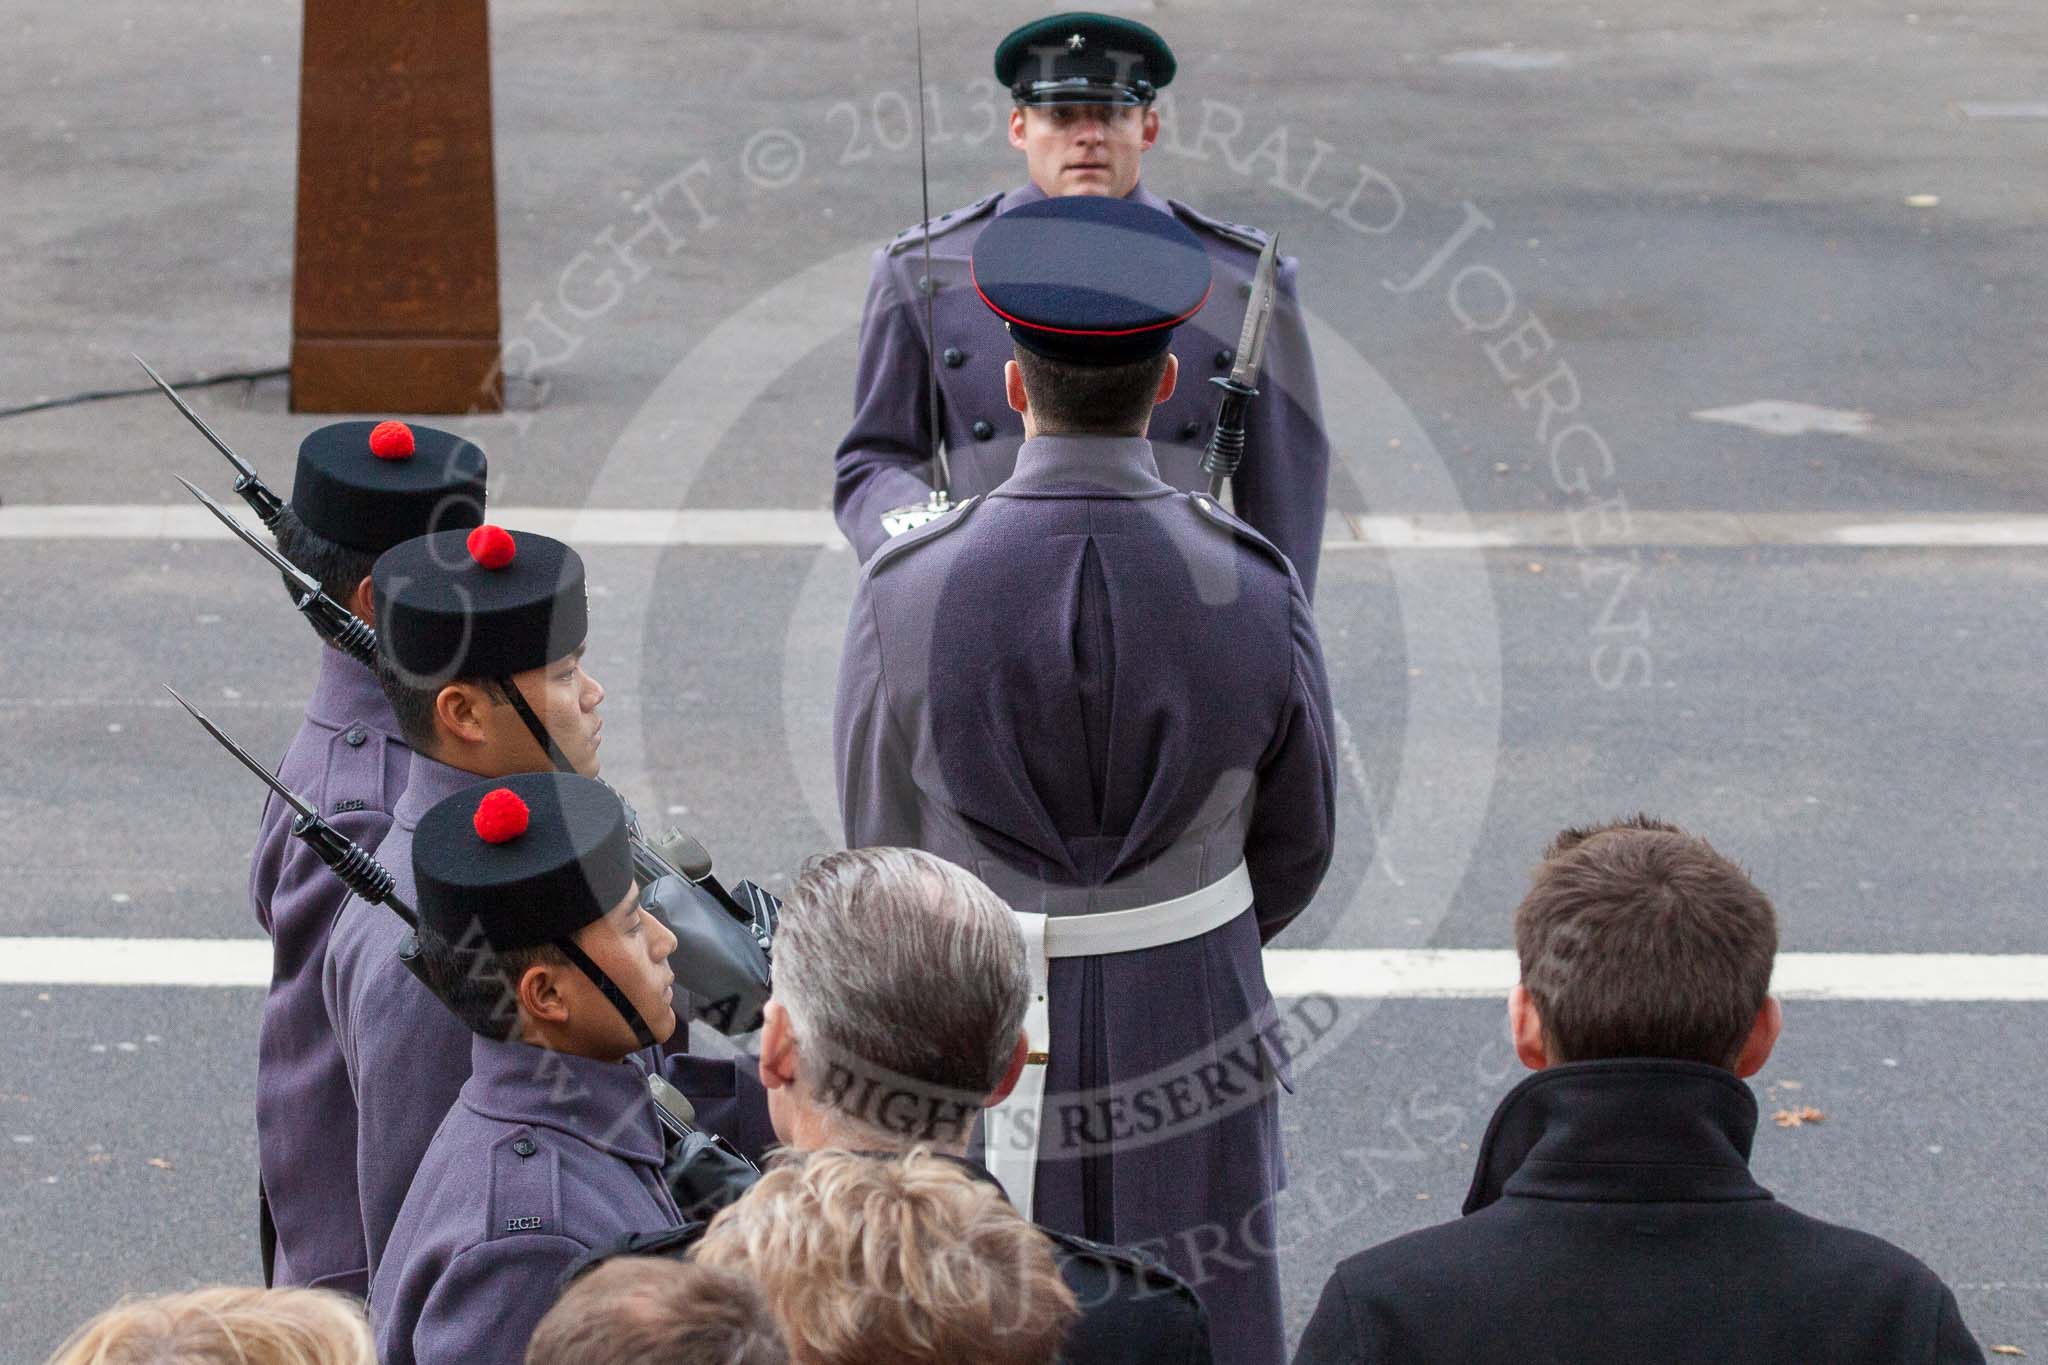 Remembrance Sunday at the Cenotaph 2015: A captain of the Gurkha Rifles commanding the Second Battalion The Royal Gurkha Rifles, based in Shorncliffe, Kent. Image #48, 08 November 2015 10:25 Whitehall, London, UK